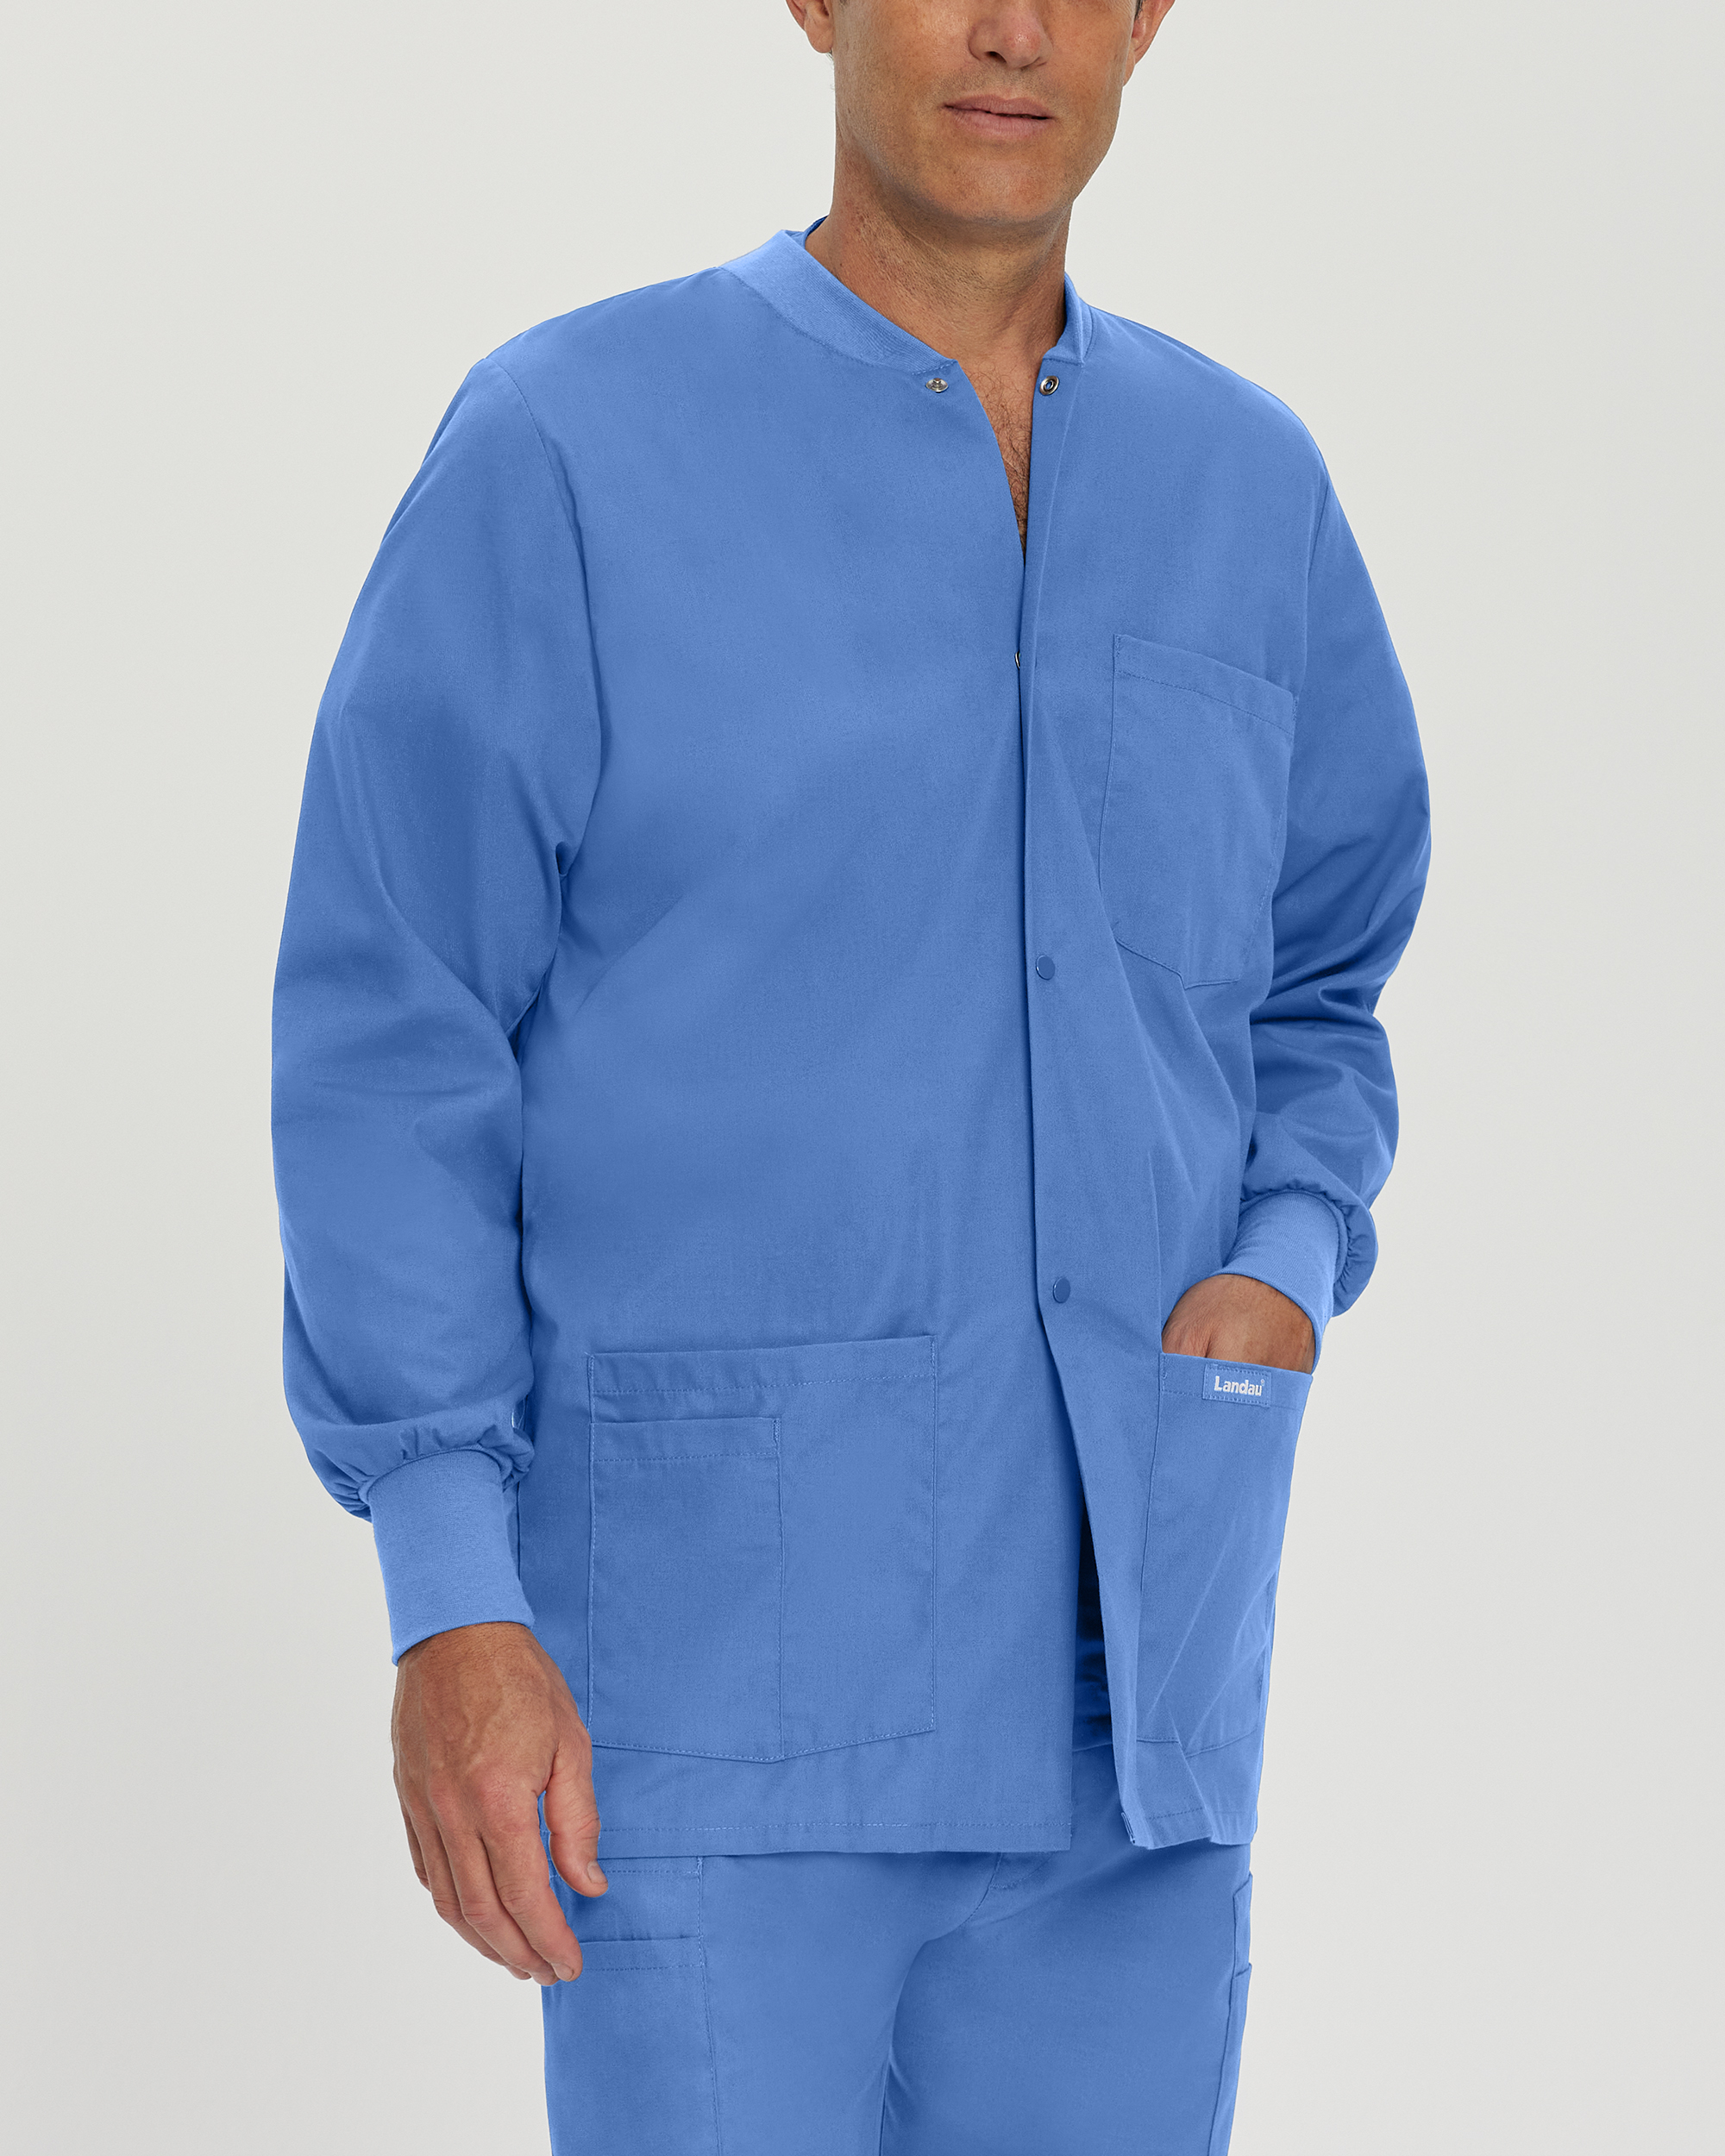 Can I match this scrub jacket with other Landau scrub tops and bottoms?